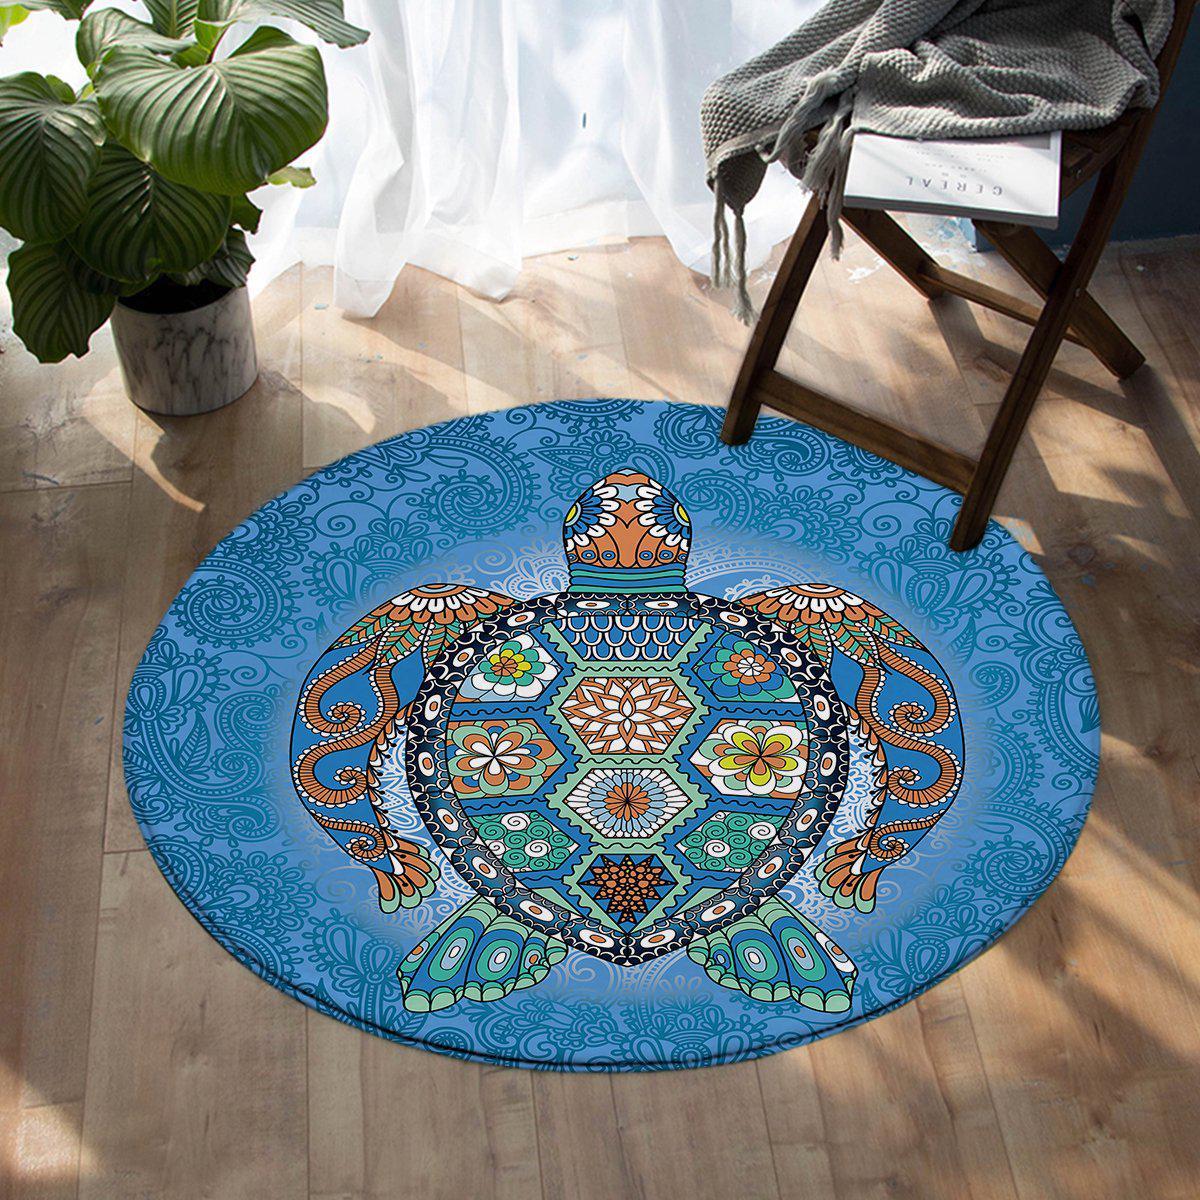 The Turtle Totem Round Area Rug